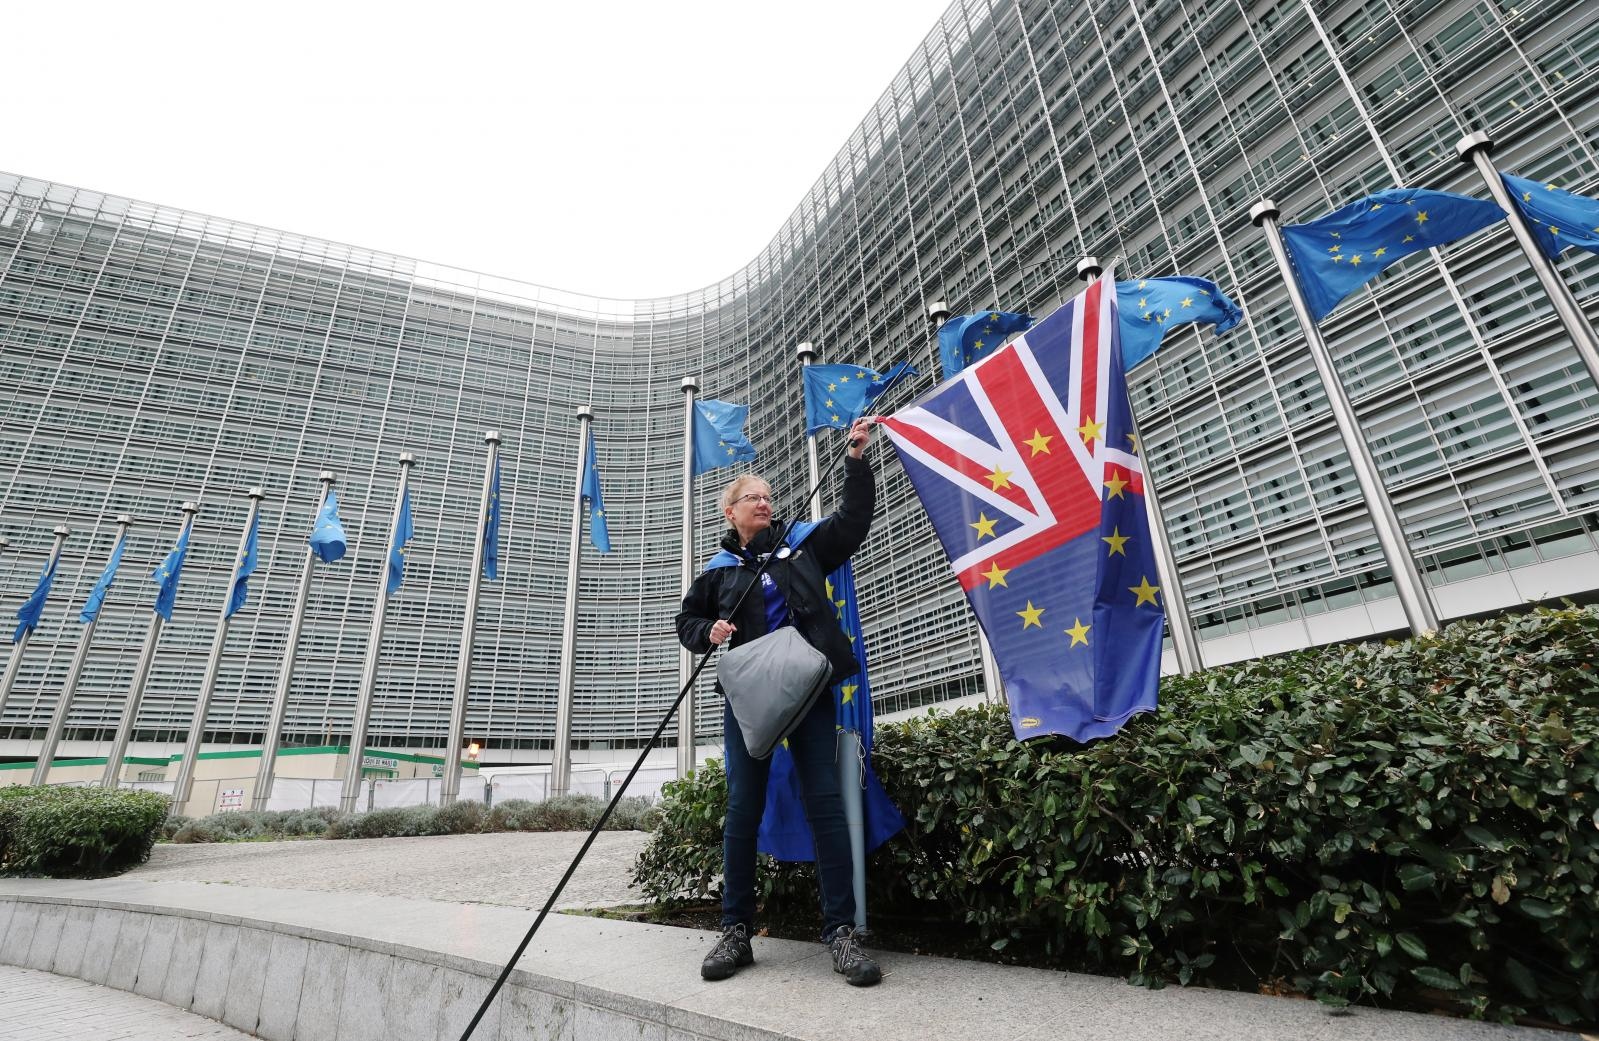 A woman holds a flag during a protest against Brexit outside the EU Commission headquarters in Brussels A woman holds a flag during a protest against Brexit outside the EU Commission headquarters in Brussels, Belgium October 9, 2019. REUTERS/Yves Herman YVES HERMAN